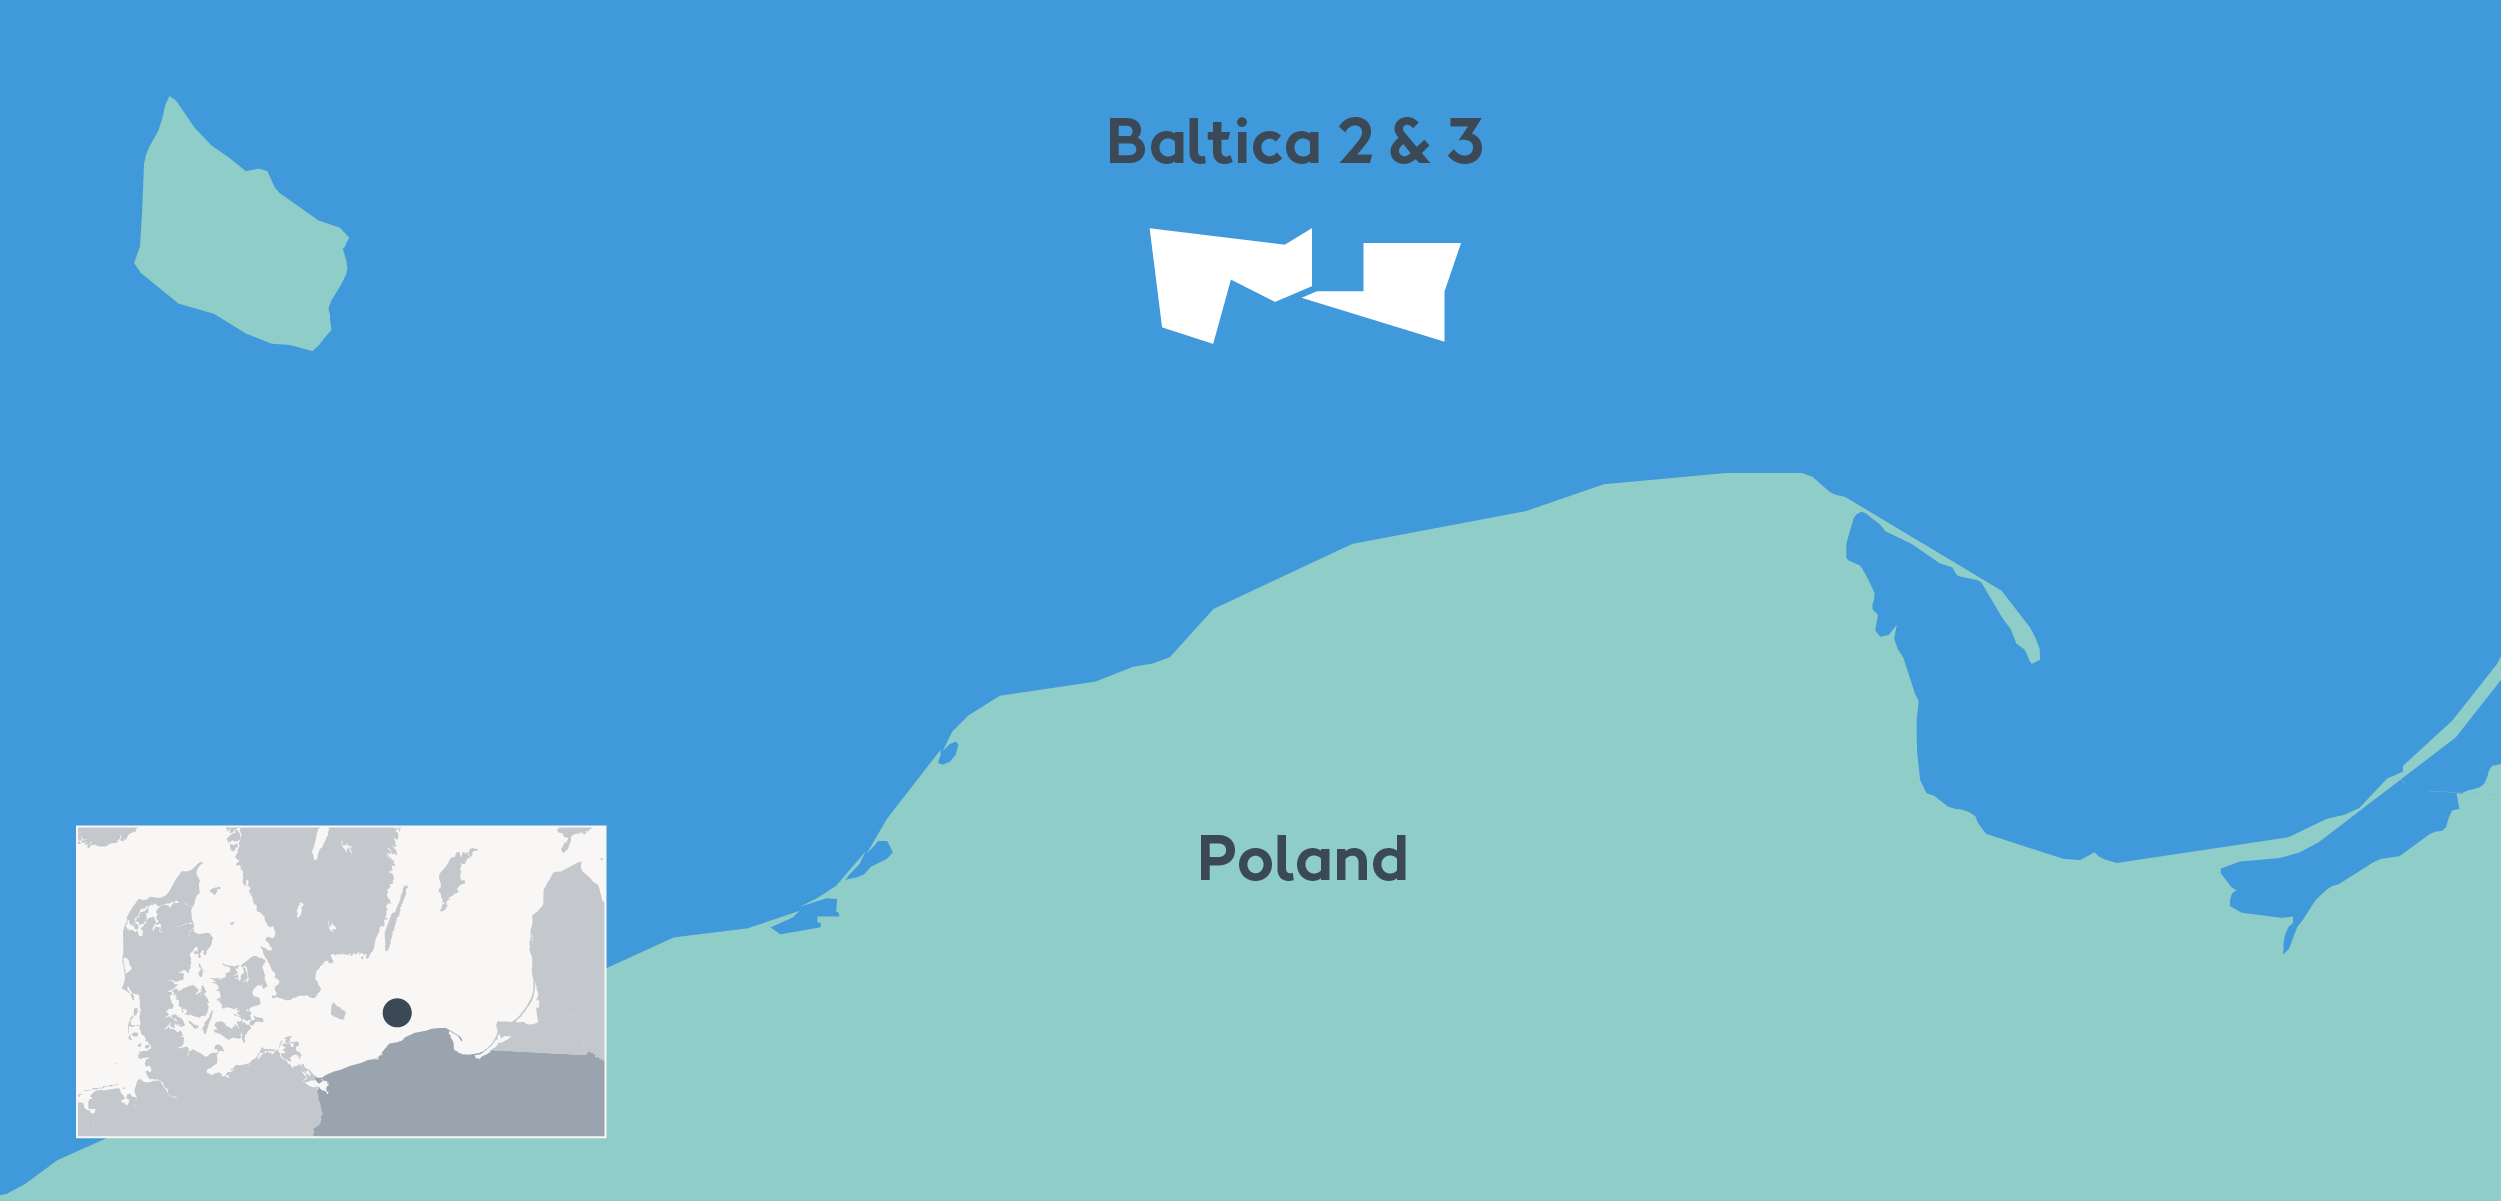 An image showing Baltica 2 & 3 projects' locations off Poland